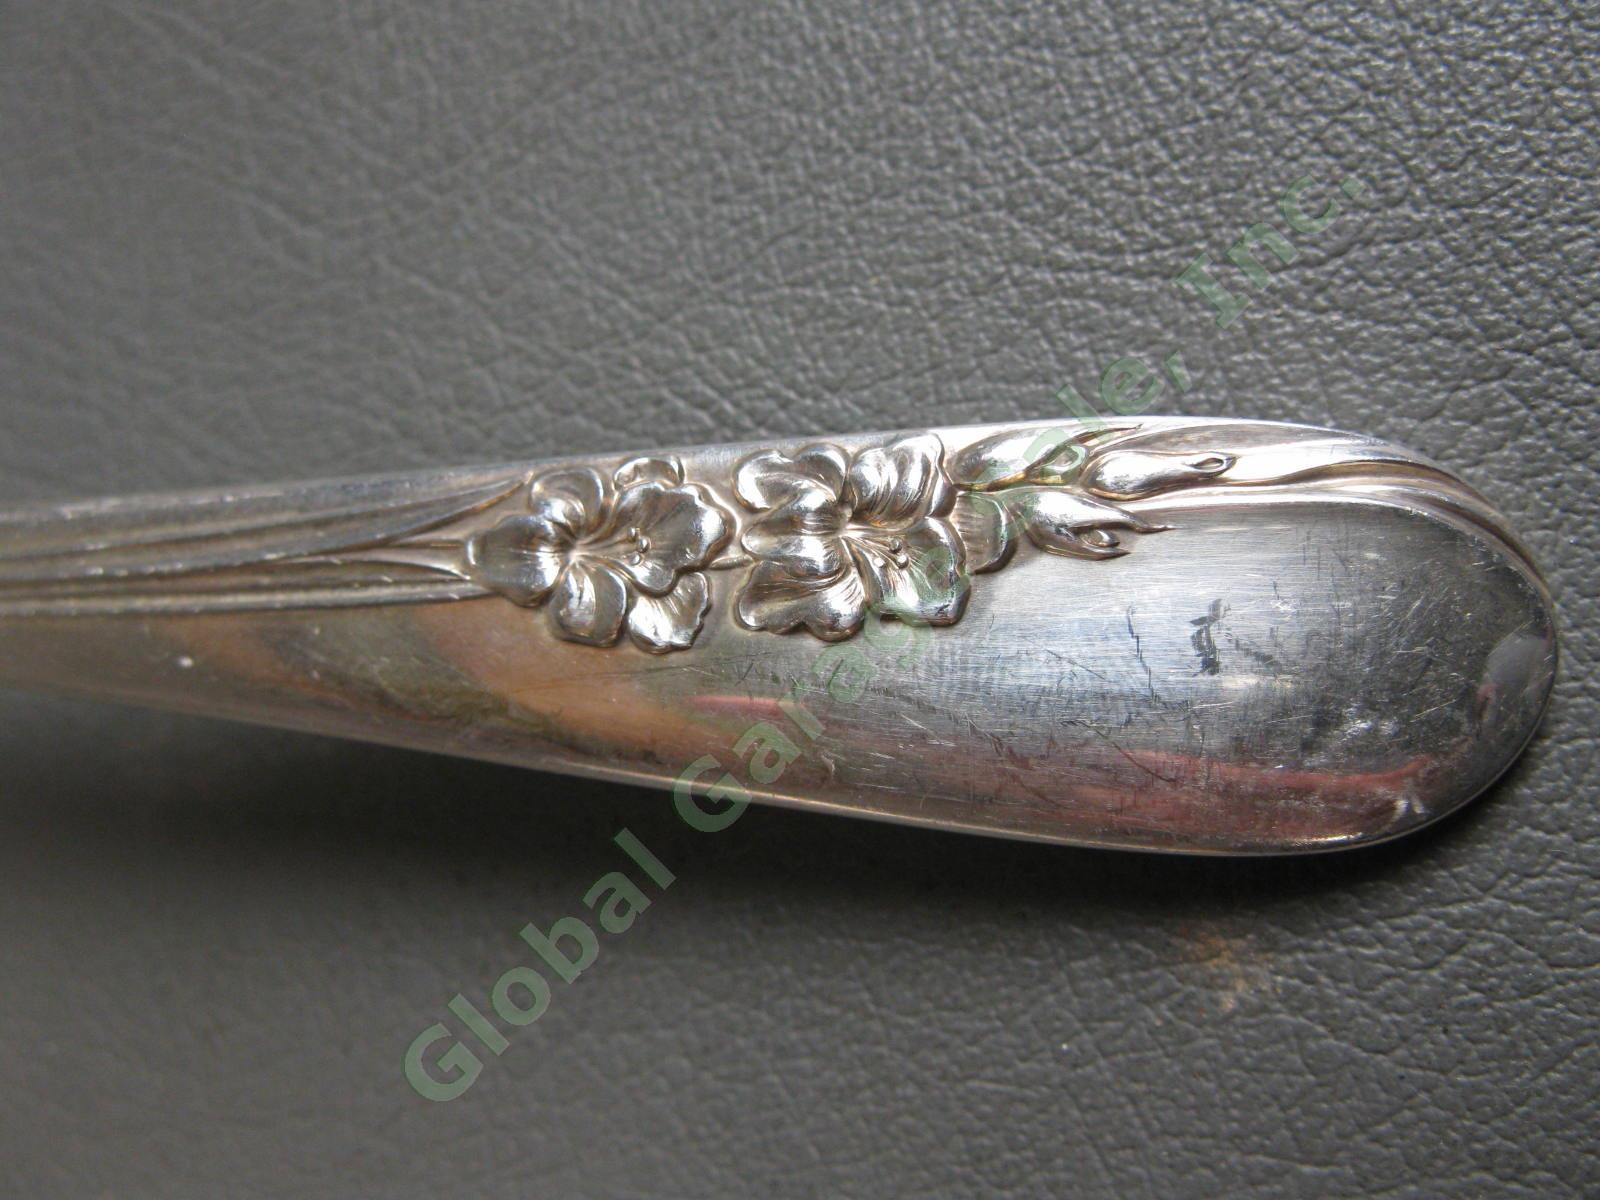 2 International Sterling Silver Blossom Time Pierced Serving Spoon Set Pair 124g 2